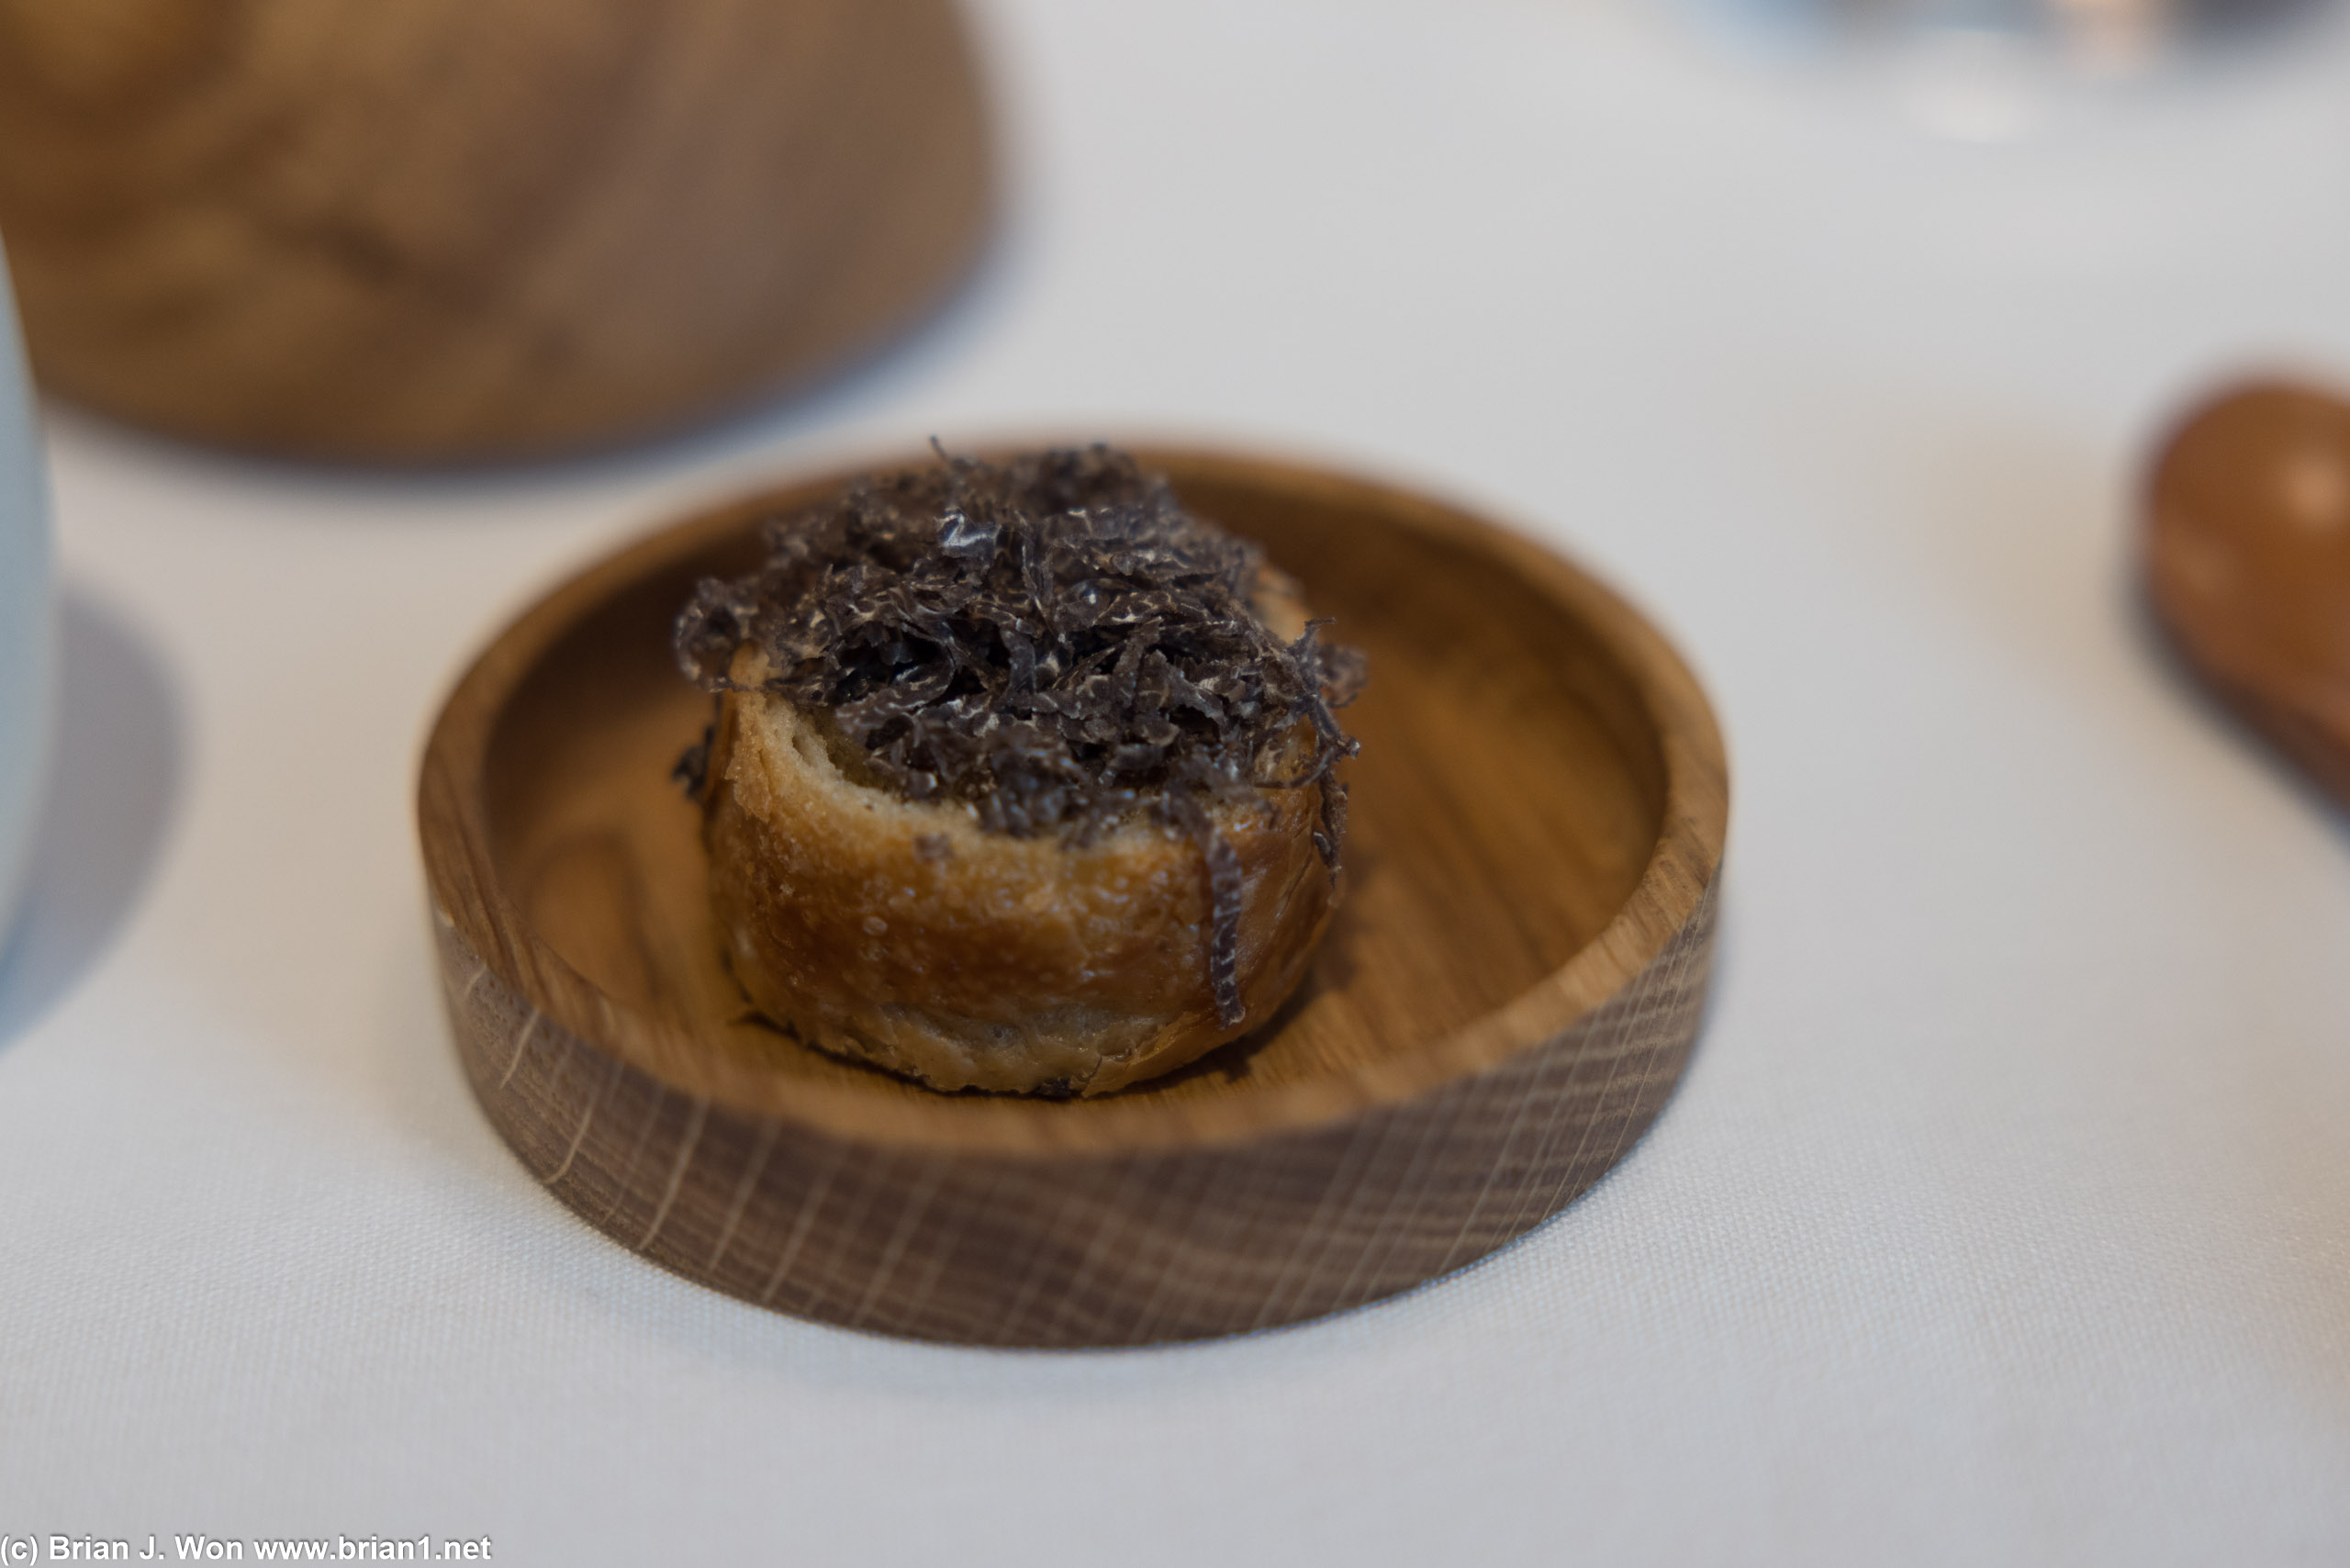 Standard fine dining portions. Topped with... truffle (?).